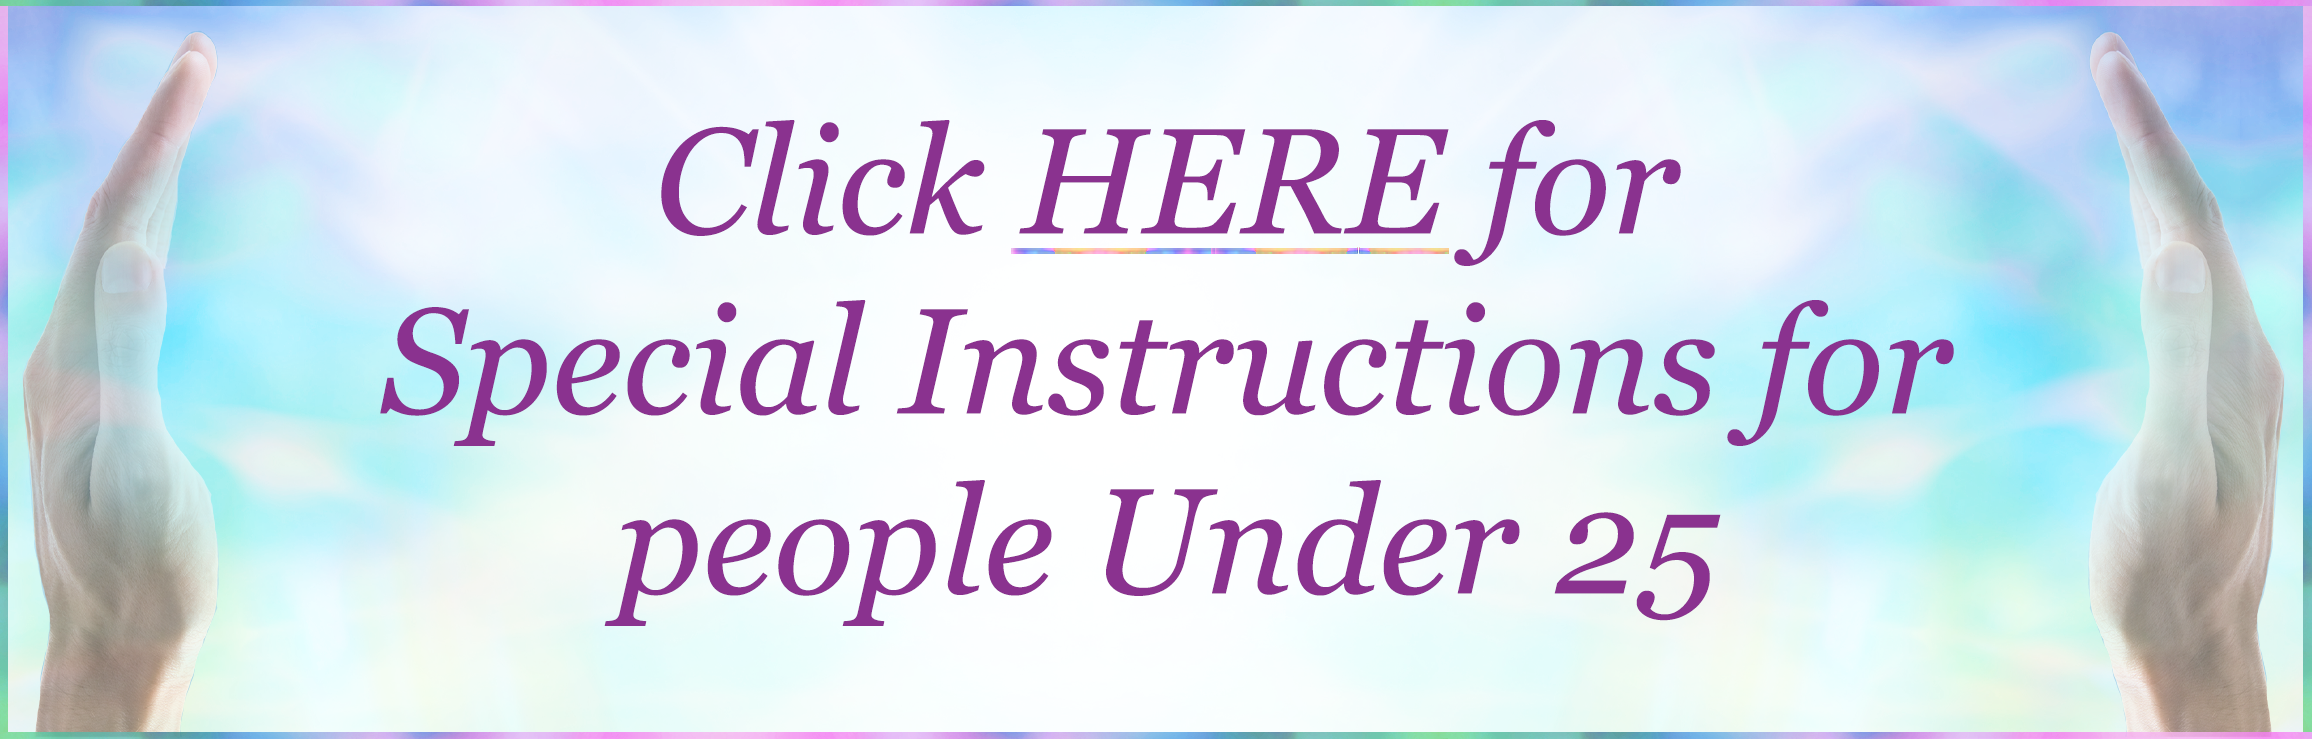 Click HERE for Special Instructions for people Under 25